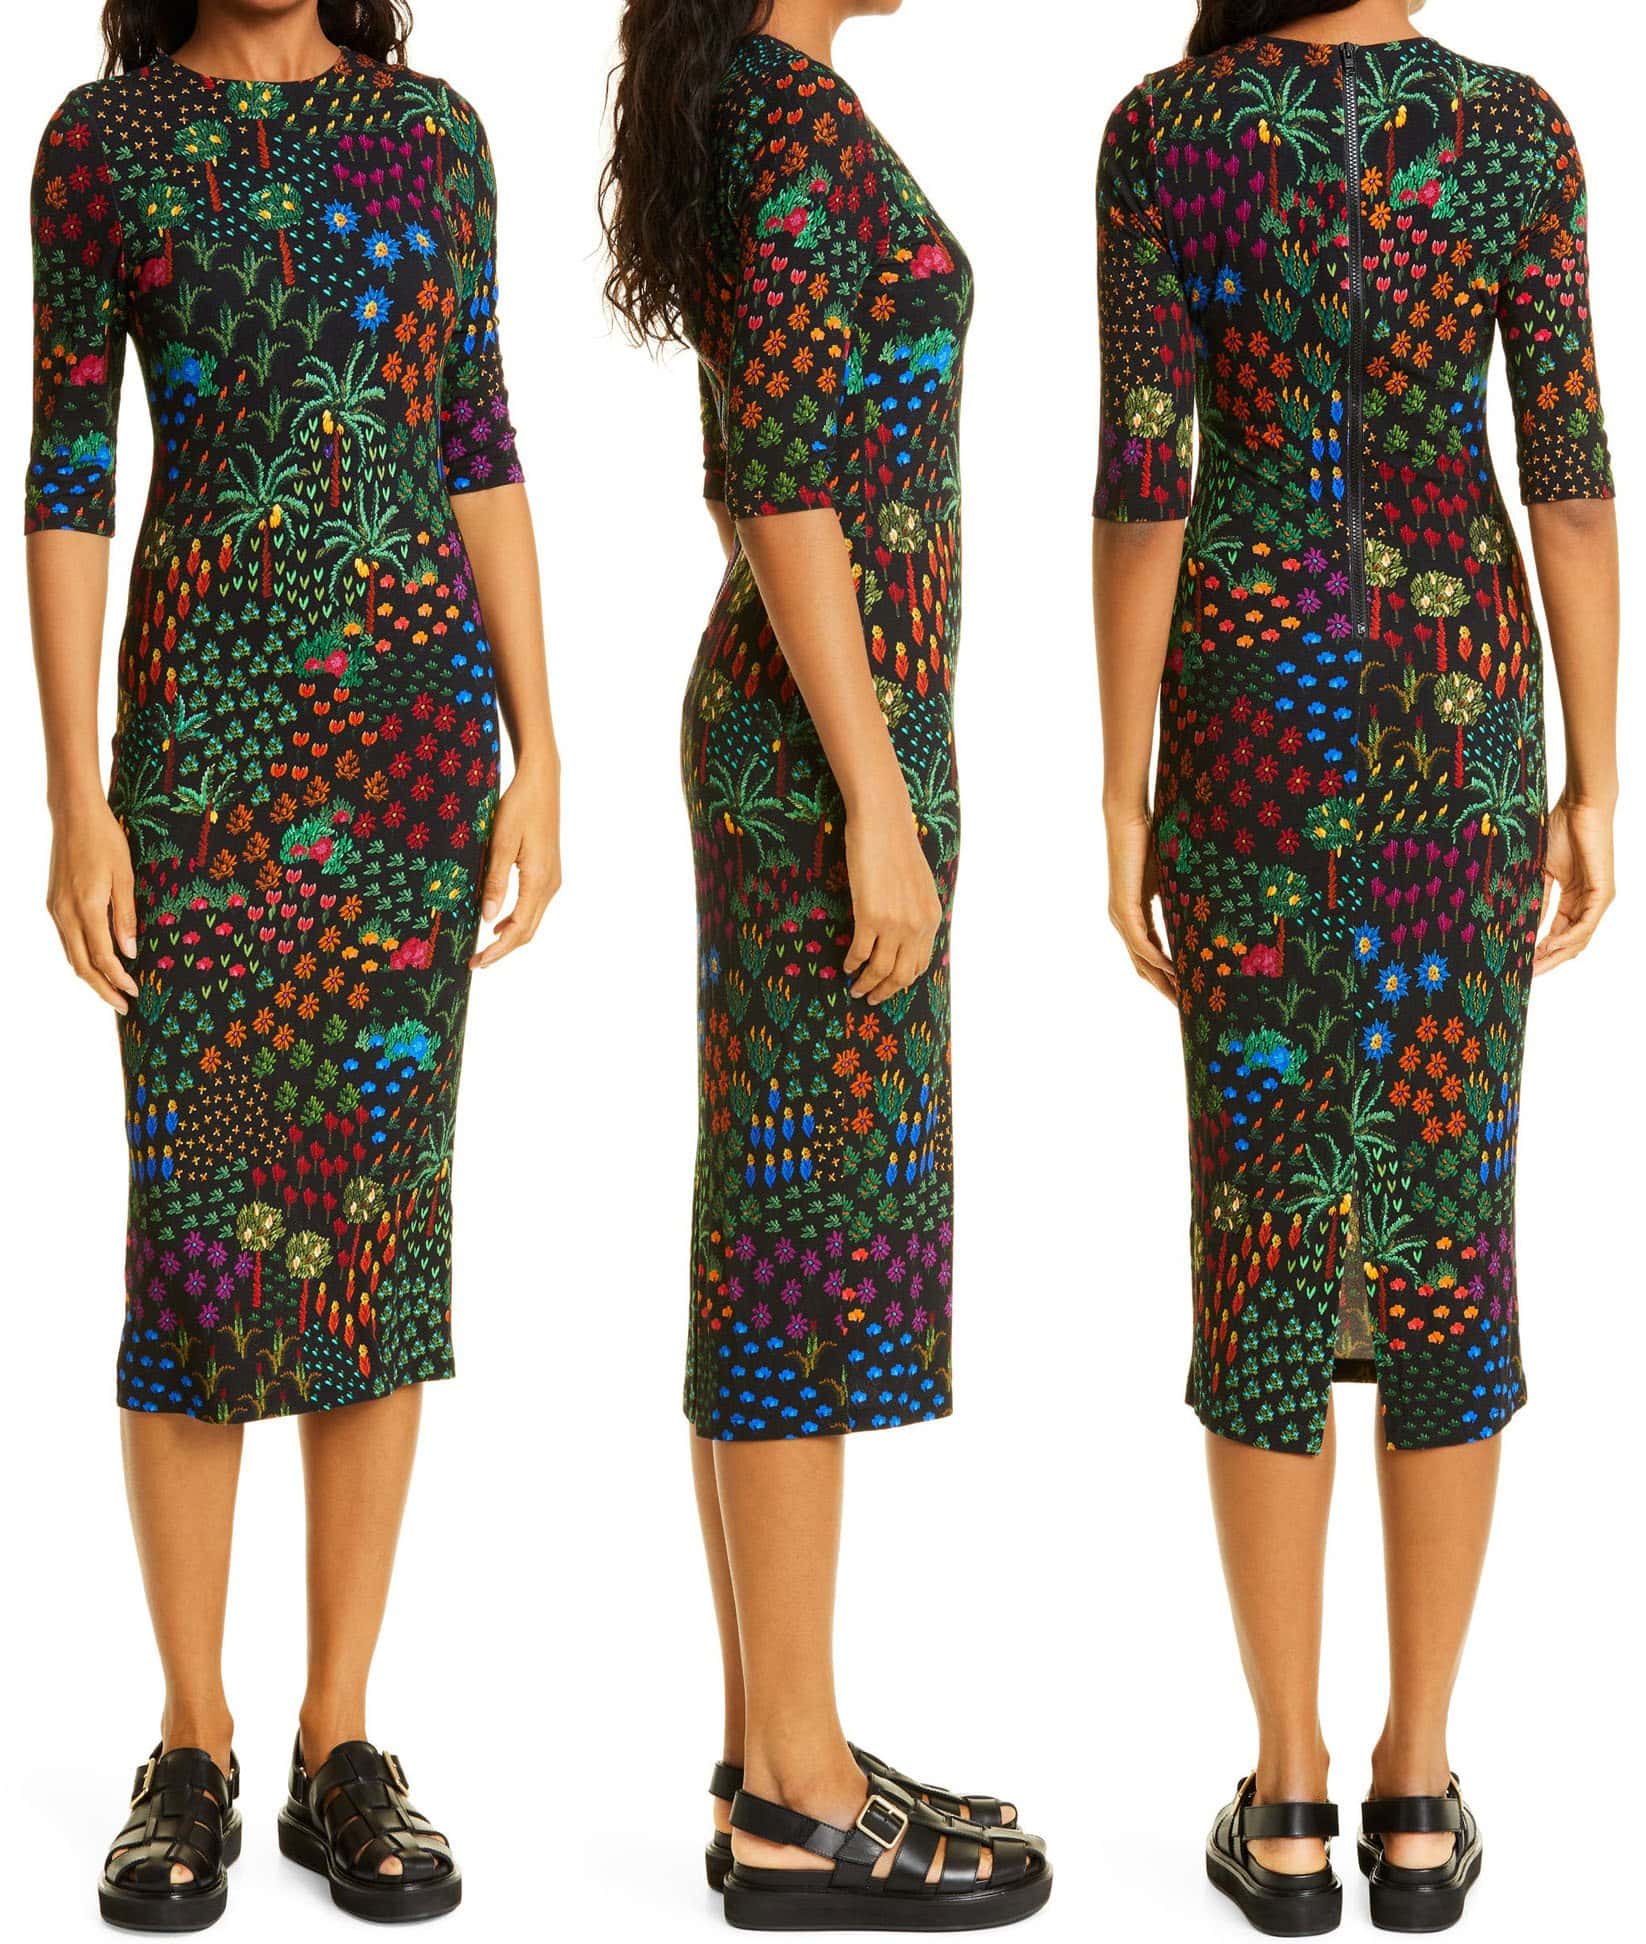 A garden of fruits on a skintight midi dress with elbow-length sleeves and a jewel neck